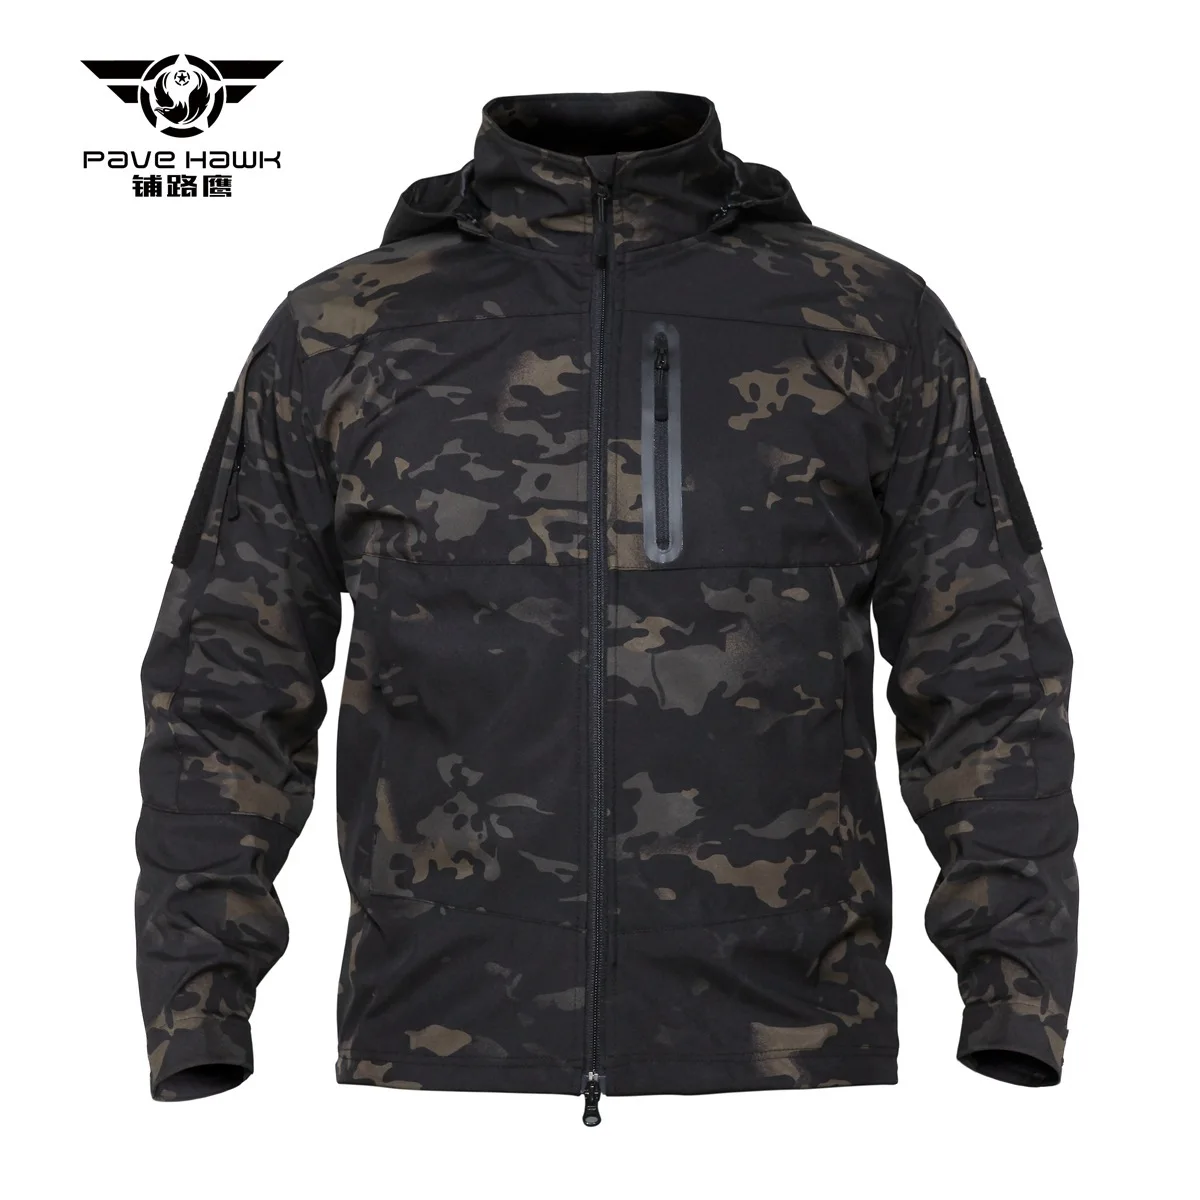 

PAVE HAWK Men's camouflage hunting suit tactical soft shell jacket fishing climbing storm jacket tactical soft shell jacket